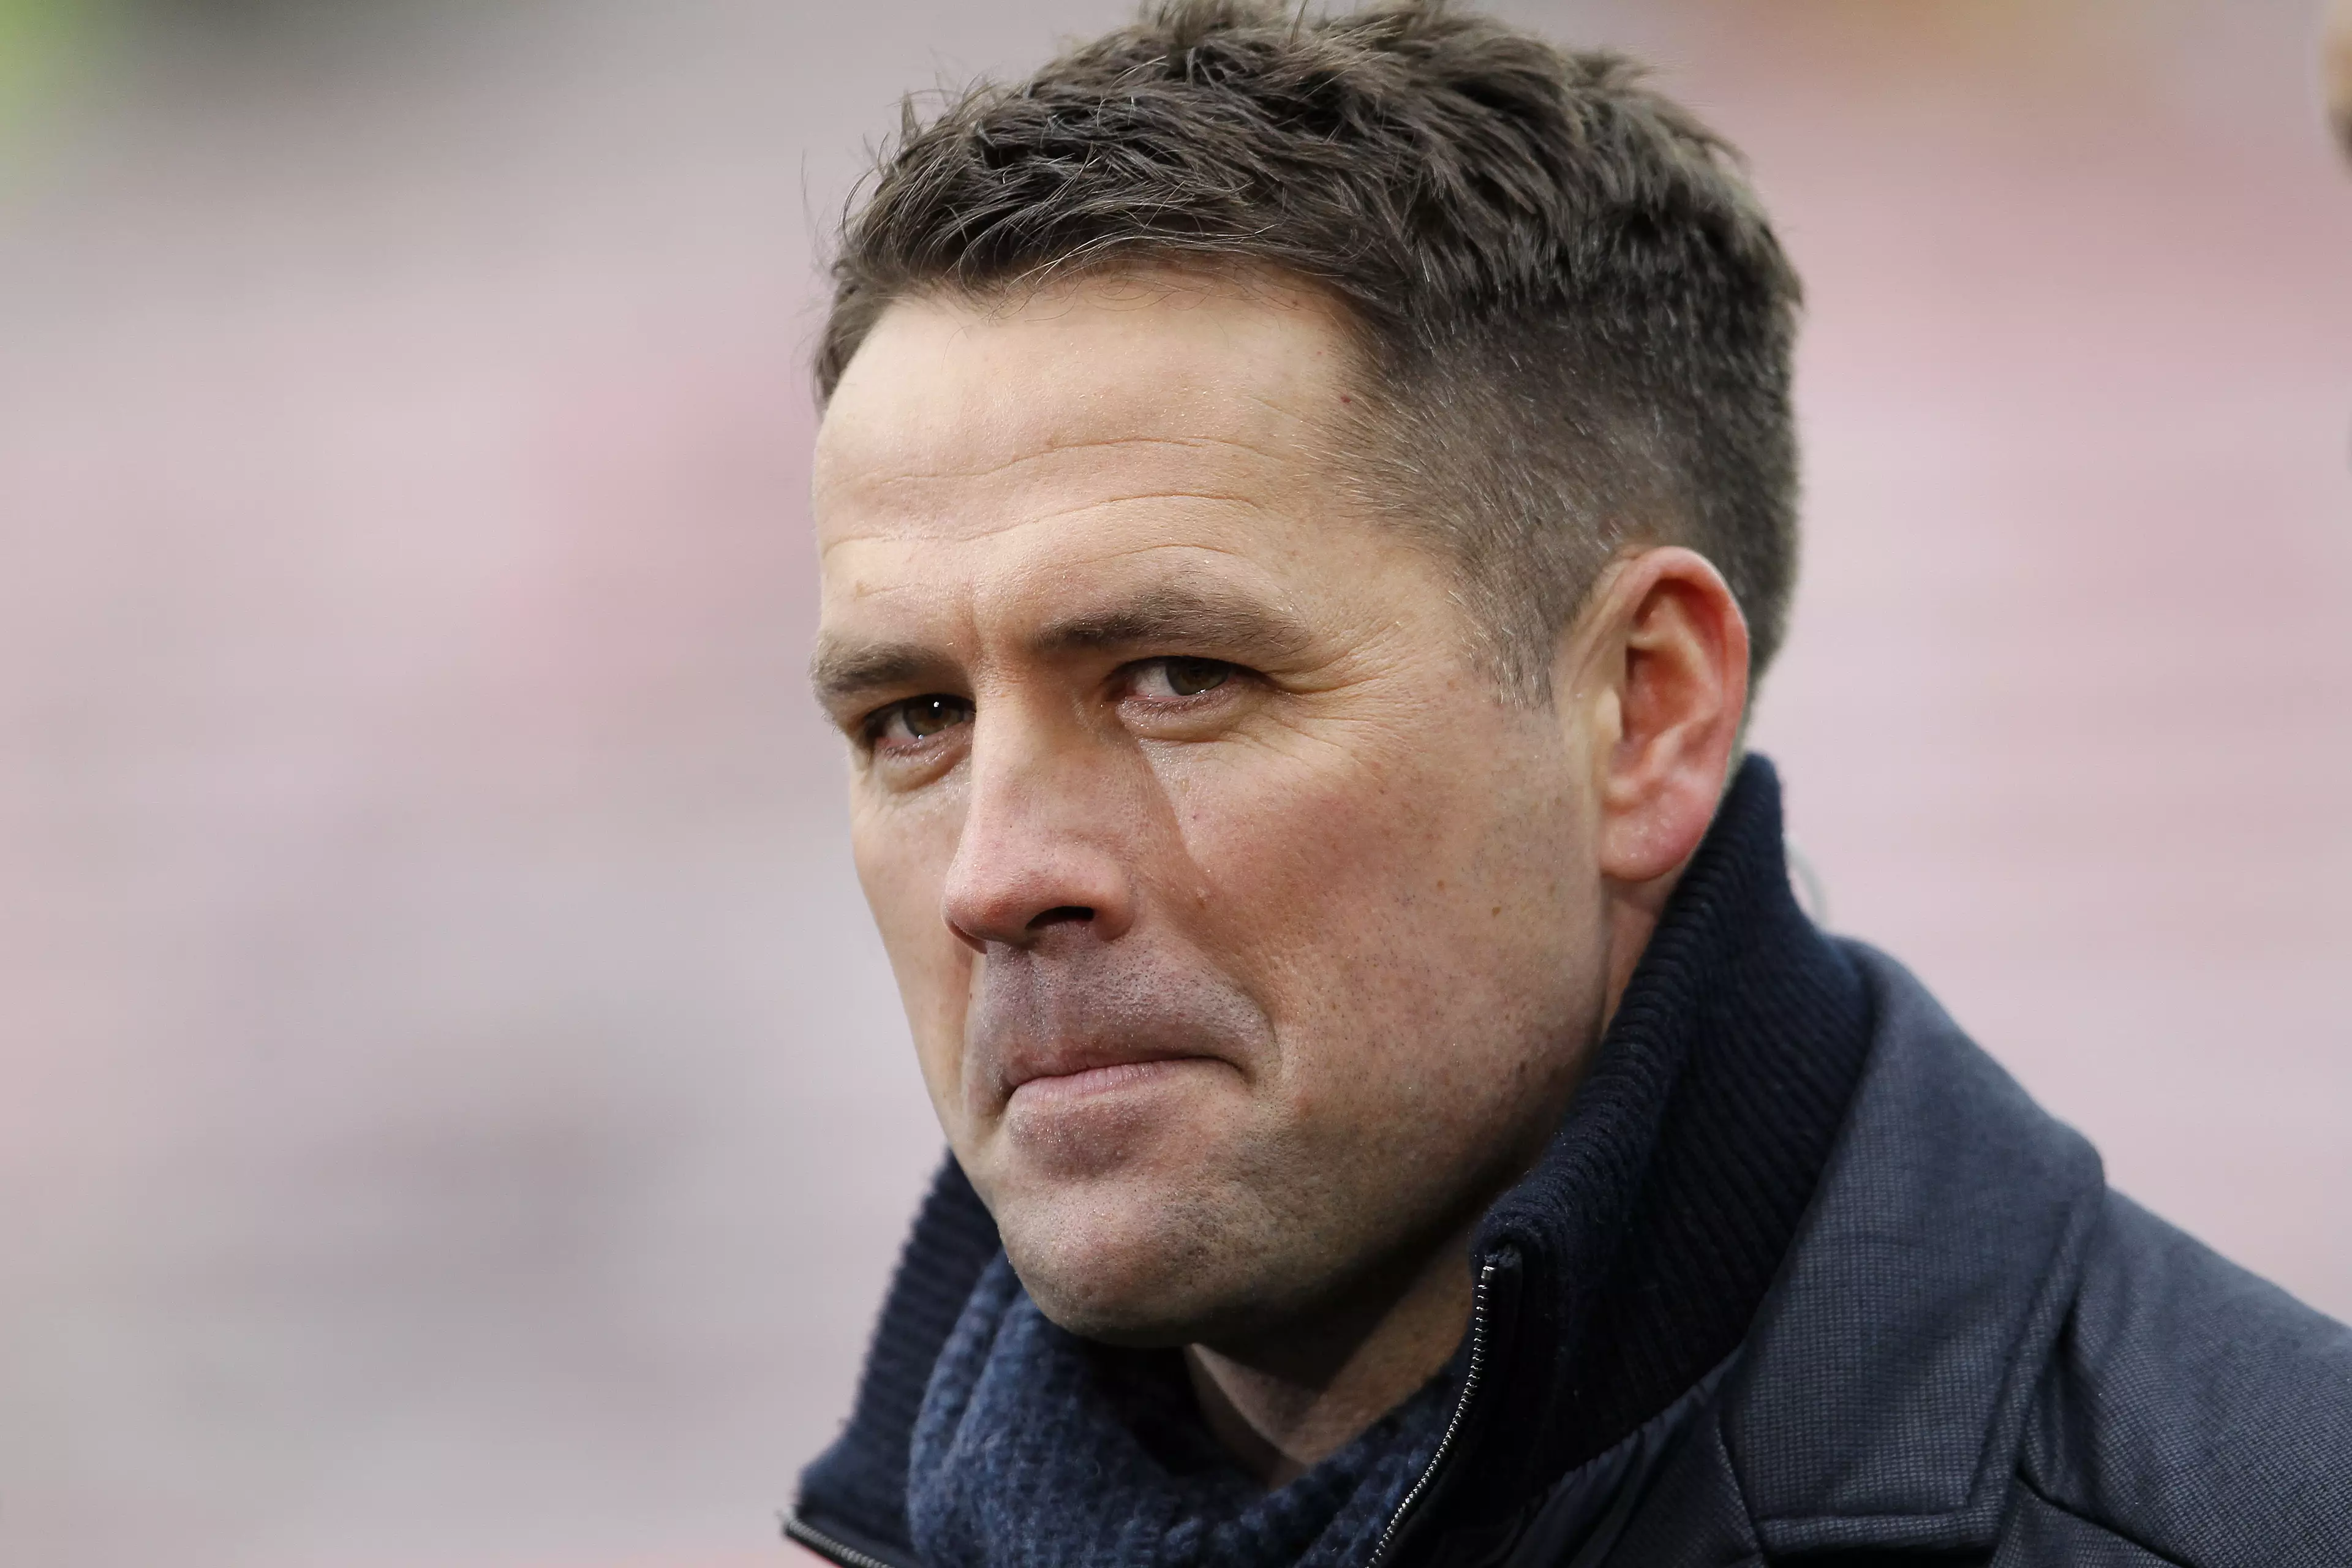  Michael Owen’s Attempt at Some Halloween Fun Spectacularly Backfires